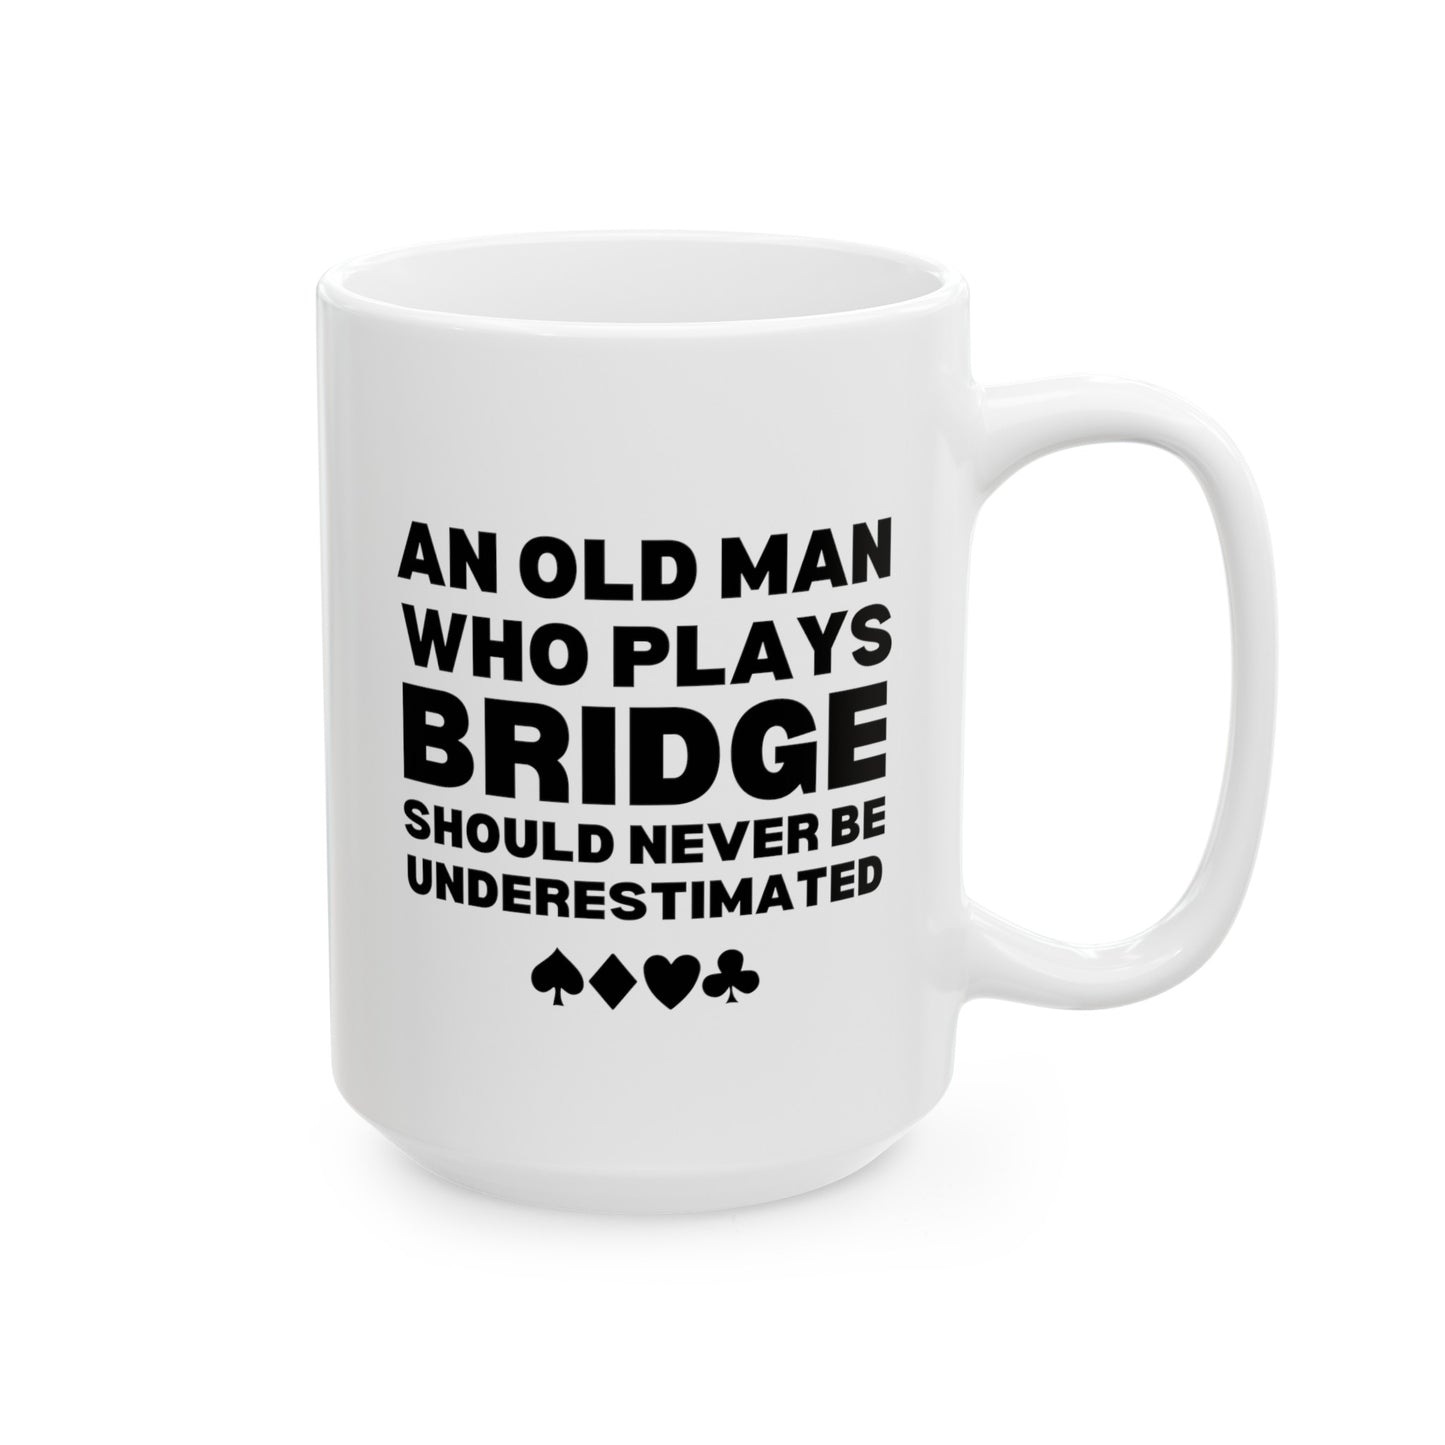 An Old Man Who Plays Bridge Should Never Be Underestimated 15oz white funny large coffee mug gift for player card game waveywares wavey wares wavywares wavy wares